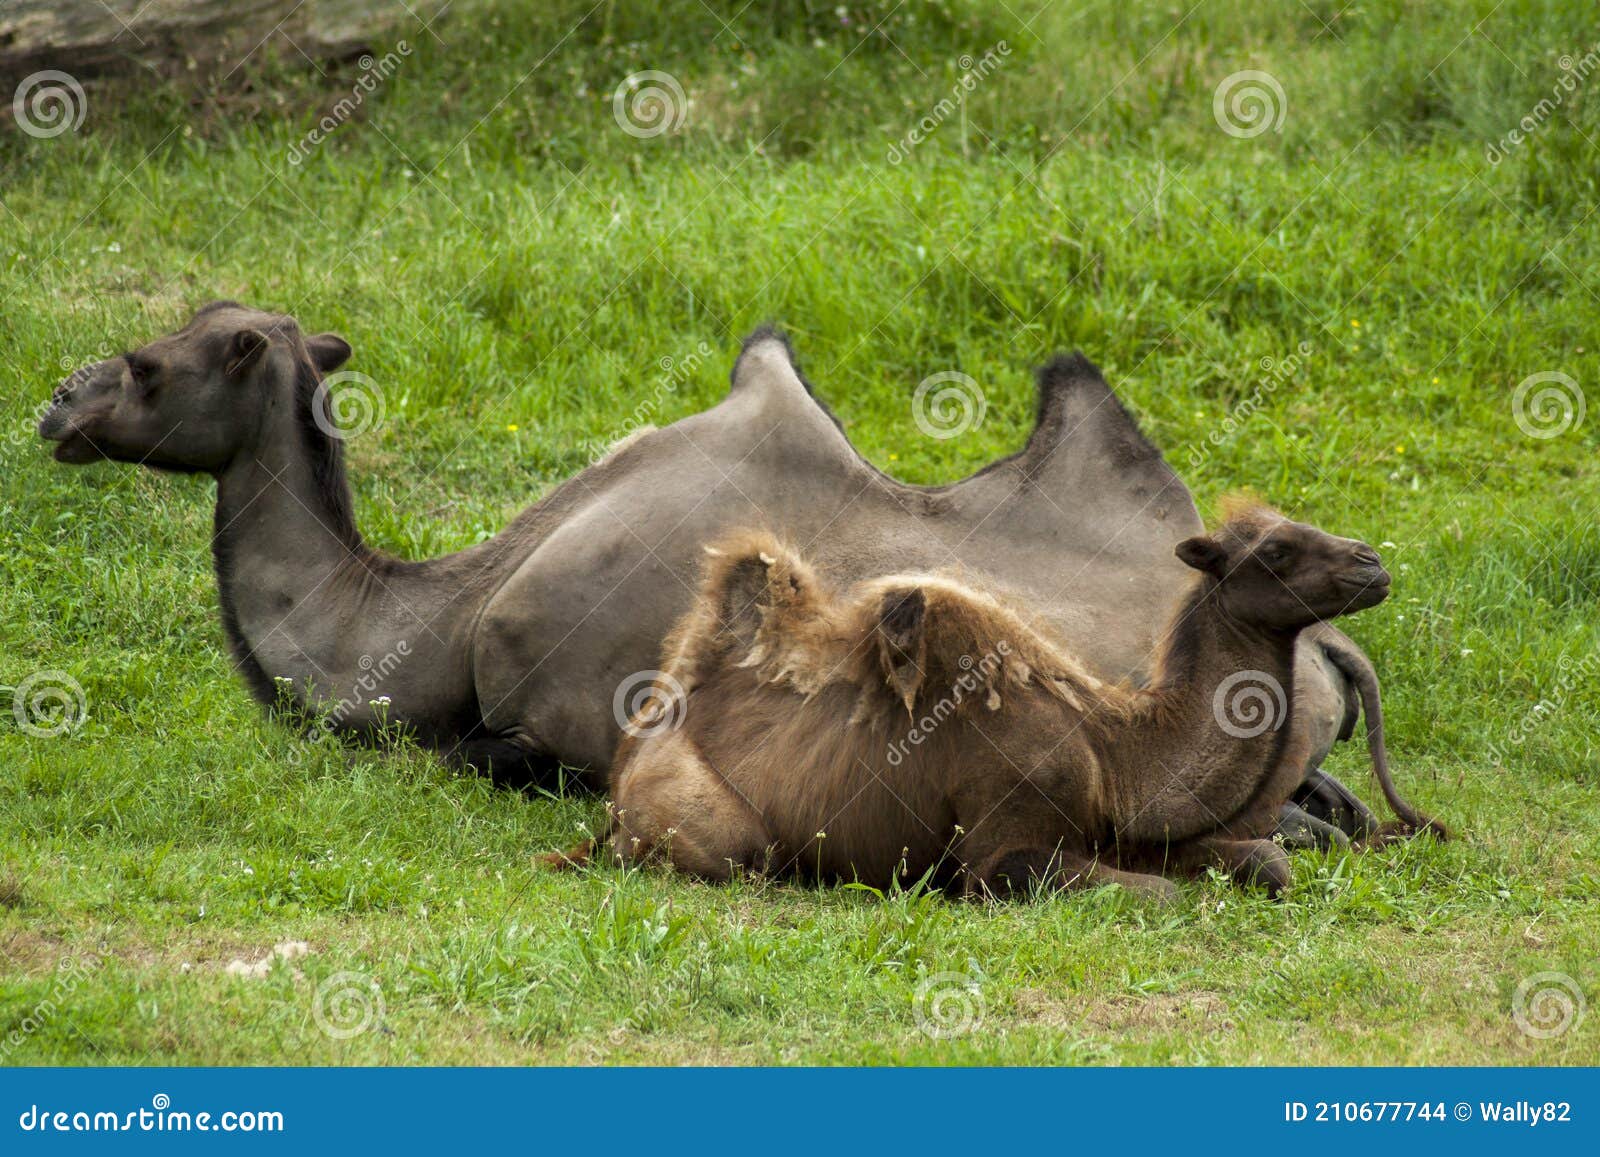 A Young Bactrian Camel Lying Next To His Mother in a Grassy Meadow ...